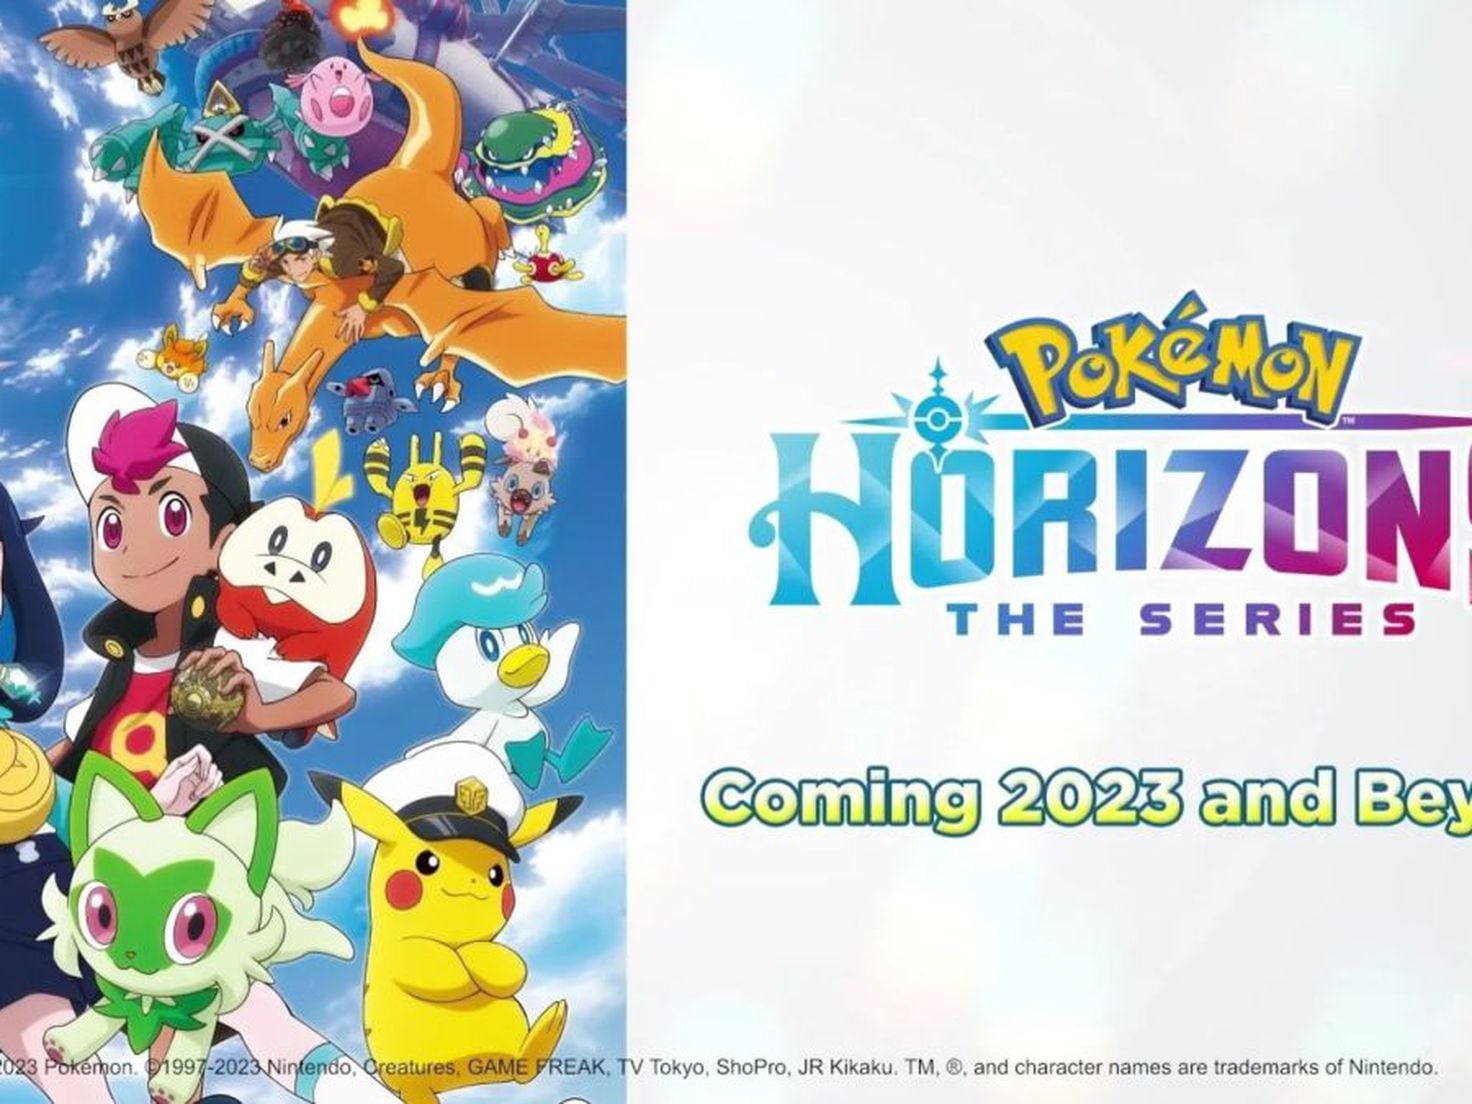 Pokémon anime's new season coming to Netflix in US, watch the